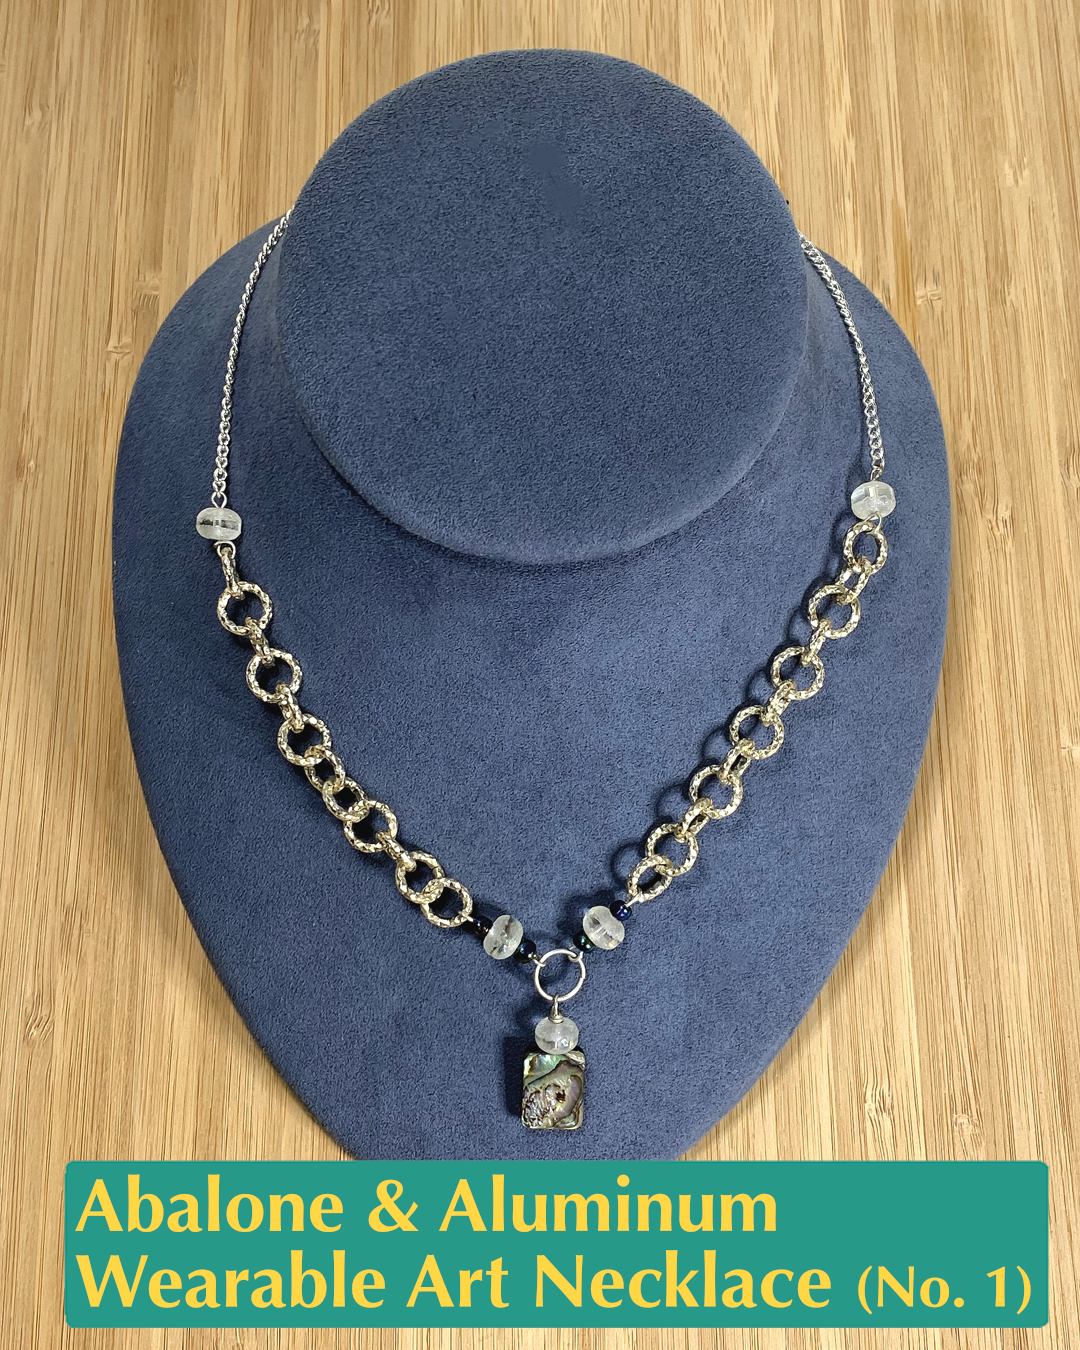 handmade necklace with textured aluminum and silver-plated chain, crystal and salvaged bead accents, and an abalone charm